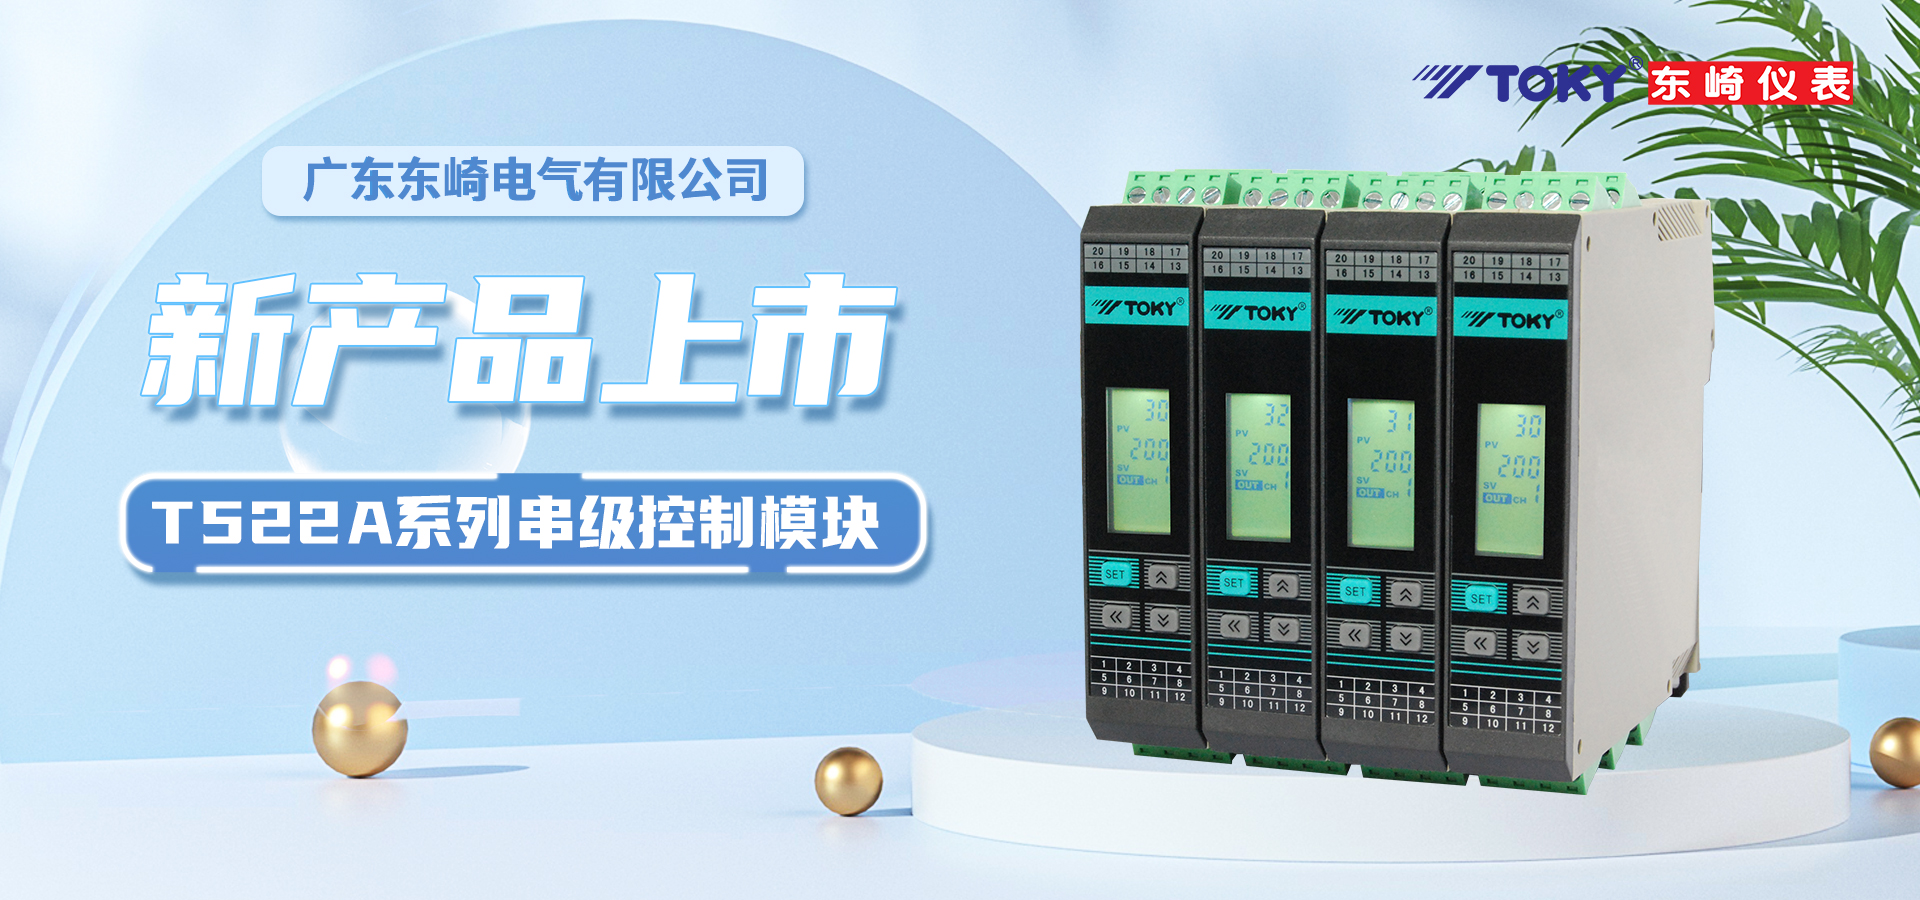 【 New Product Launch 】 T522A Cascade Control Module